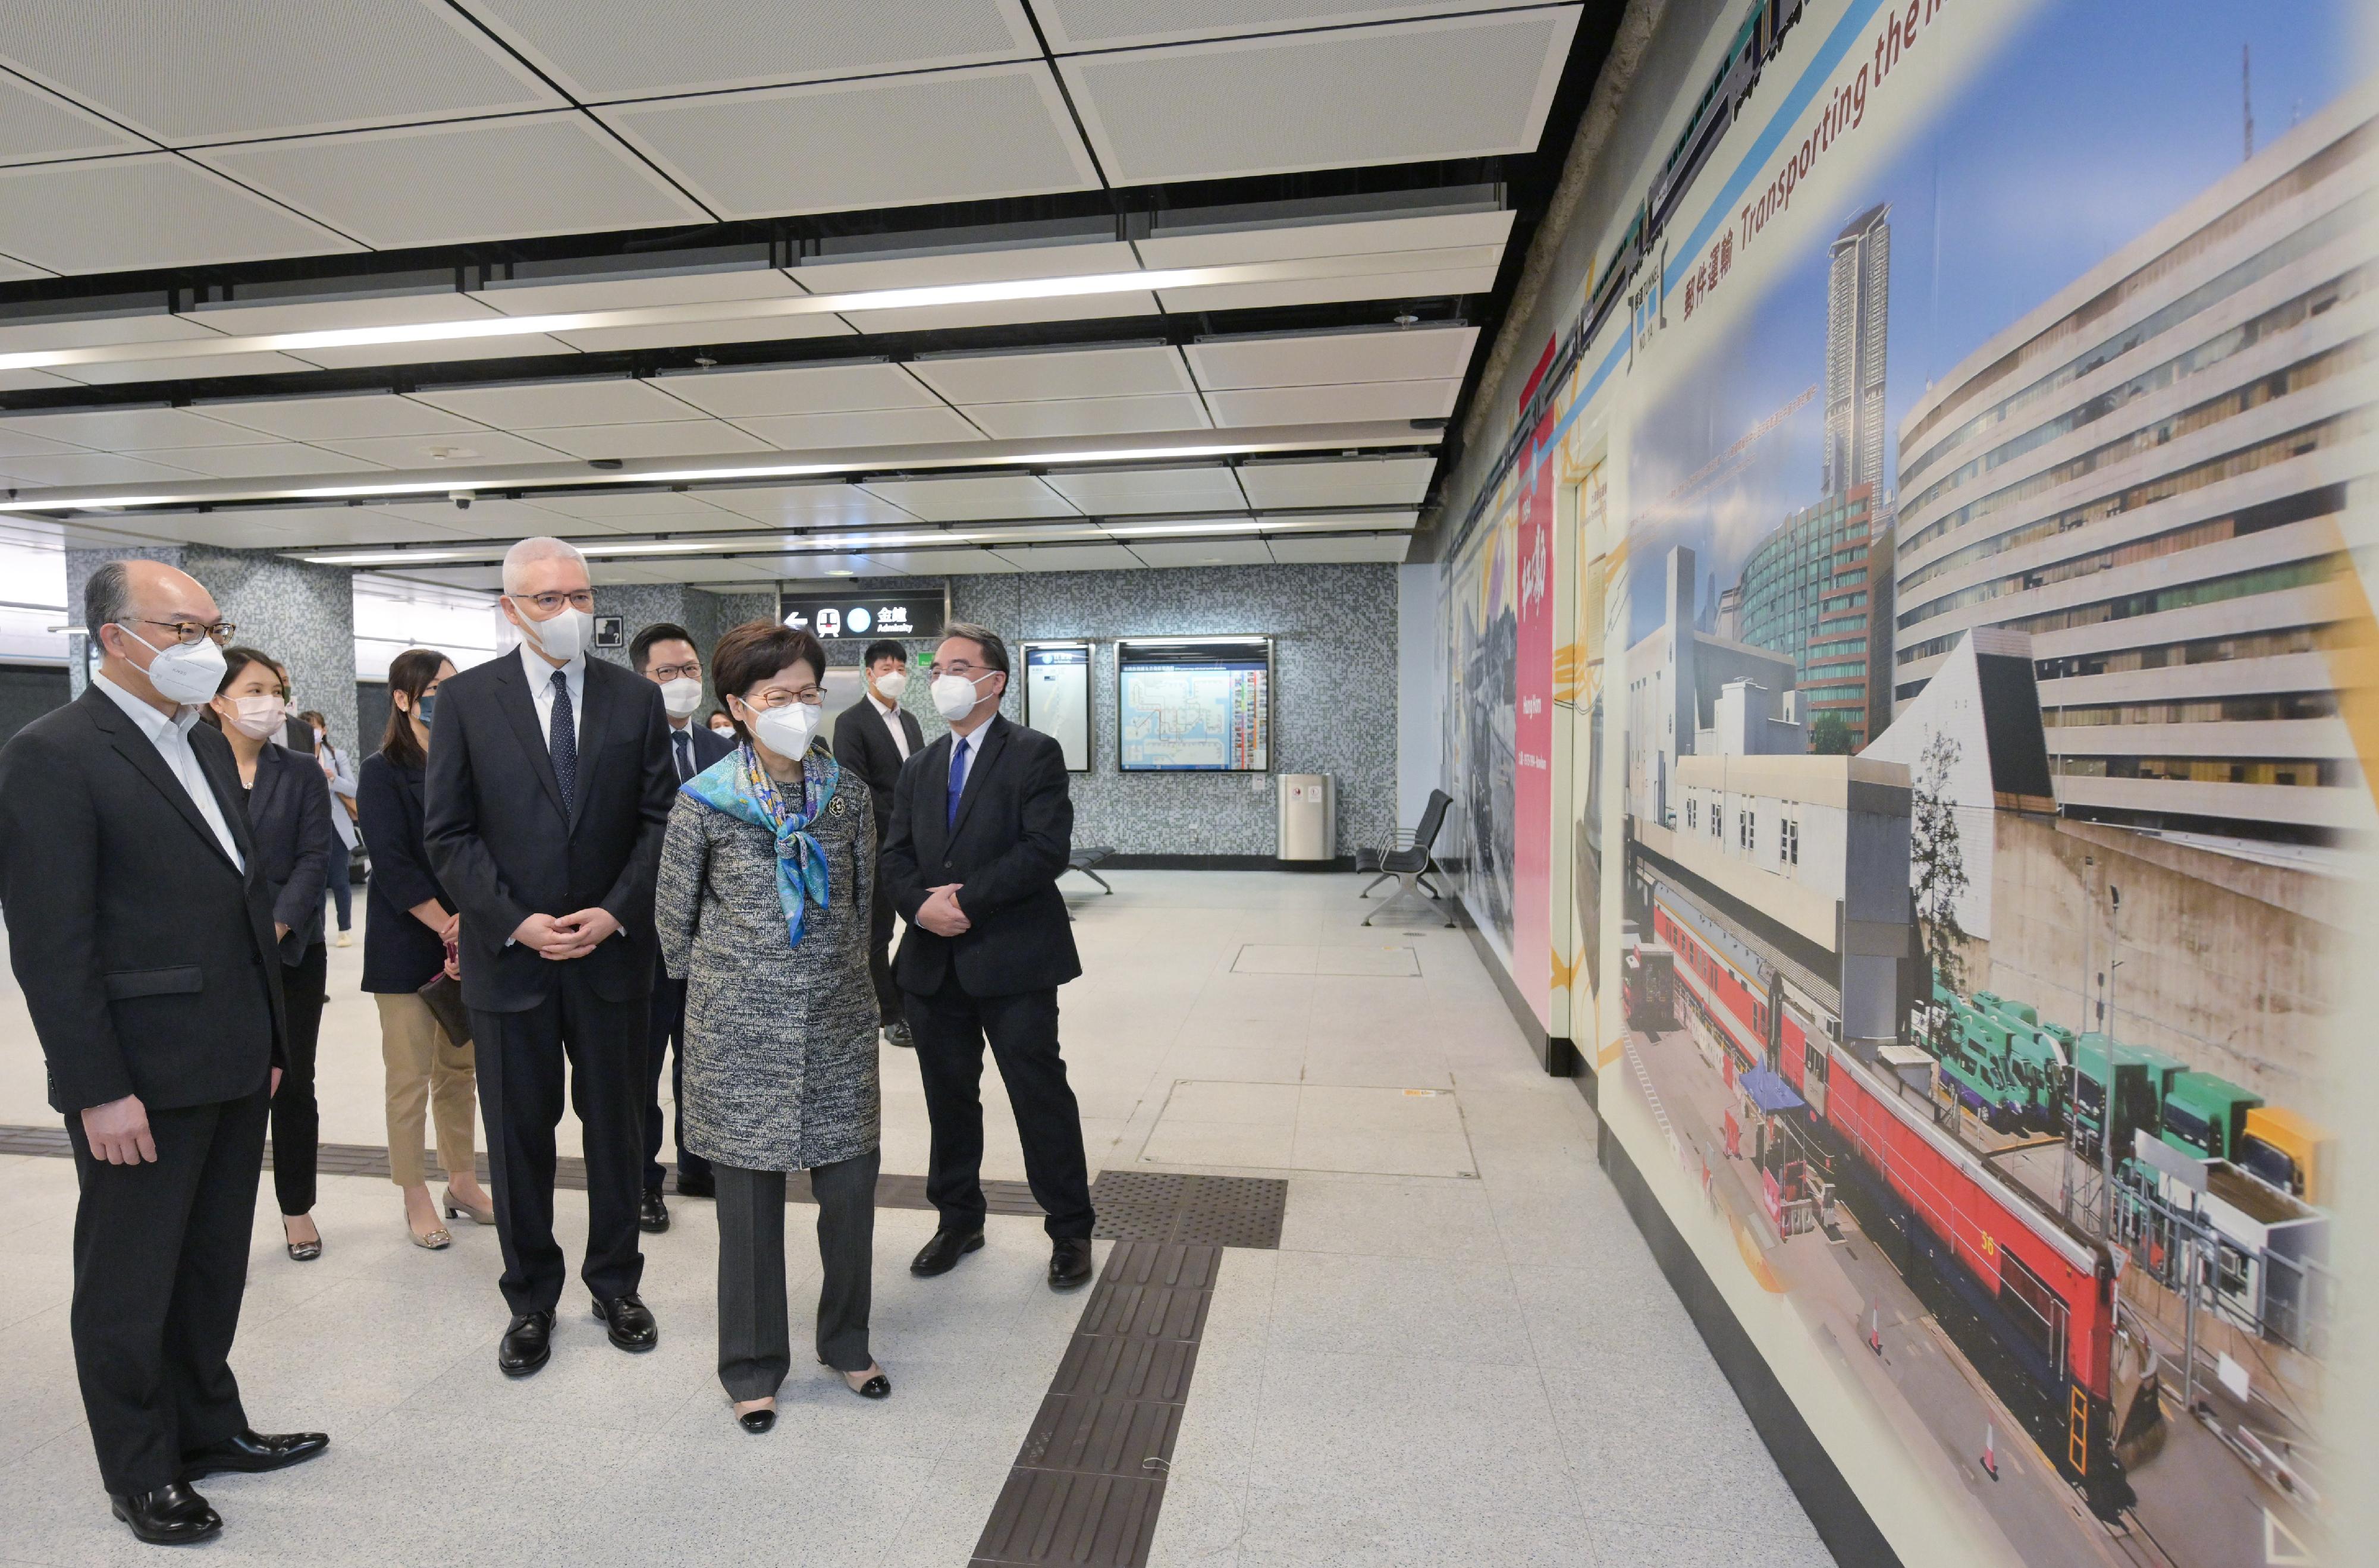 The Chief Executive, Mrs Carrie Lam, visited Wan Chai North today (May 4) to view the newly constructed Exhibition Centre Station of the East Rail Line cross-harbour extension and the neighbouring facilities. Photo shows Mrs Lam (front row, second right) visiting the station's platform. Looking on are the Secretary for Transport and Housing, Mr Frank Chan Fan (front row, first left); the Chairman of the MTR Corporation Limited (MTRCL), Dr Rex Auyeung (front row, second left); and the Chief Executive Officer of the MTRCL, Dr Jacob Kam (front row, first right).